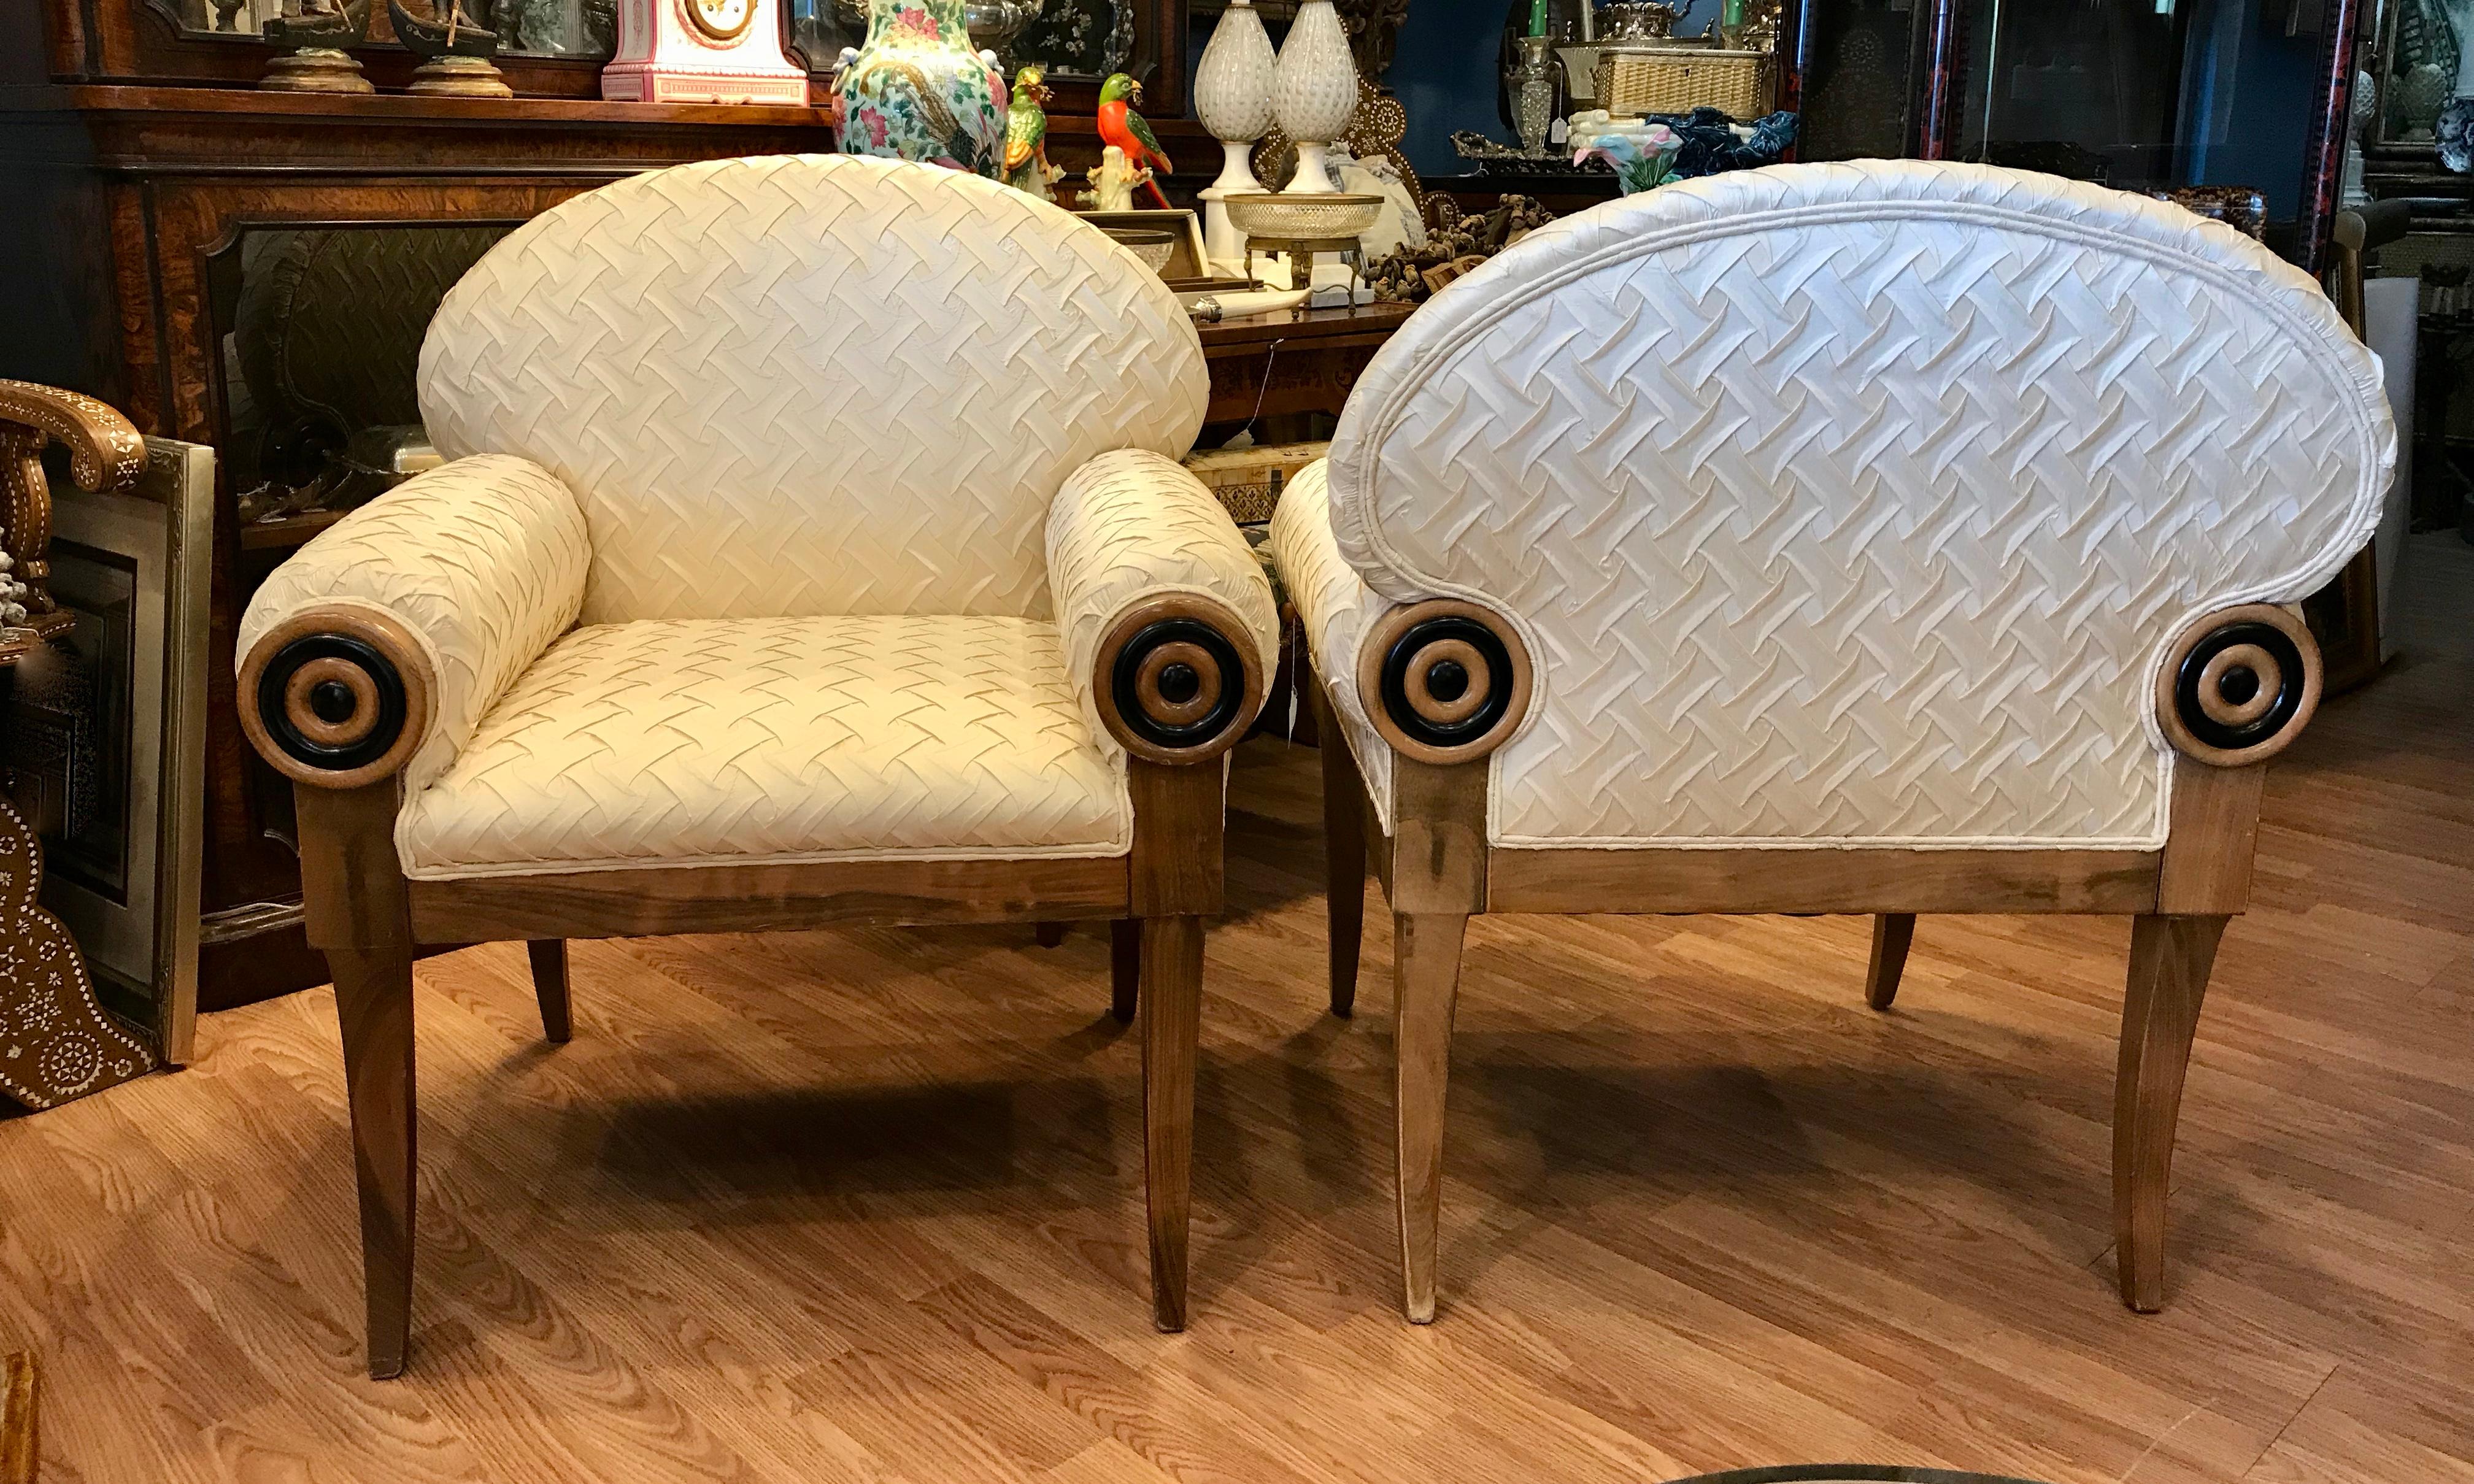 Pair of Art Deco Inspired Midcentury Club Chairs 1